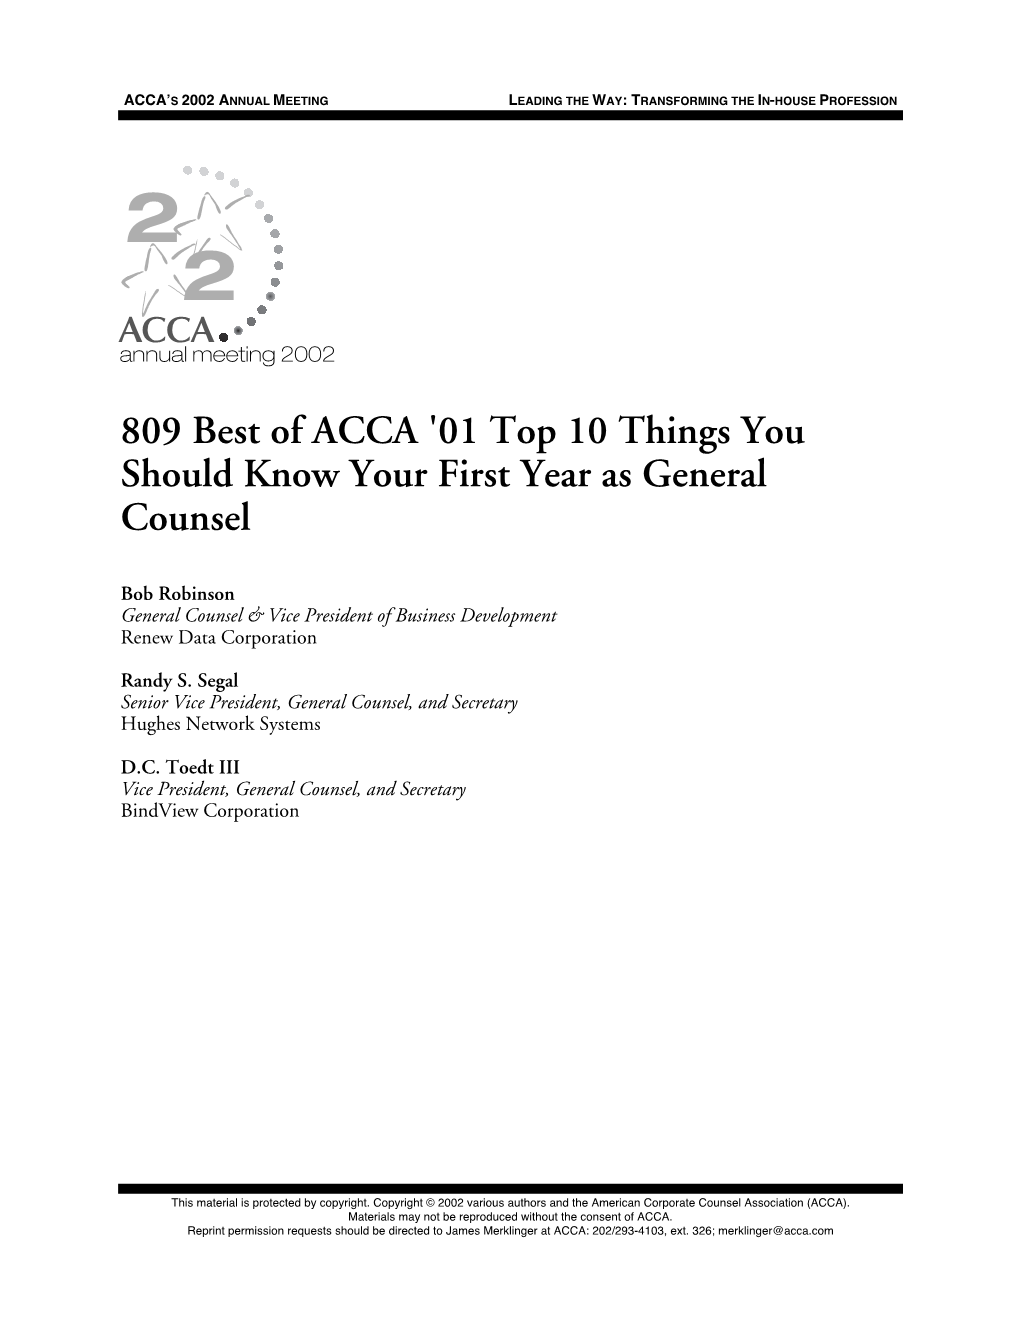 01 Top 10 Things You Should Know Your First Year As General Counsel